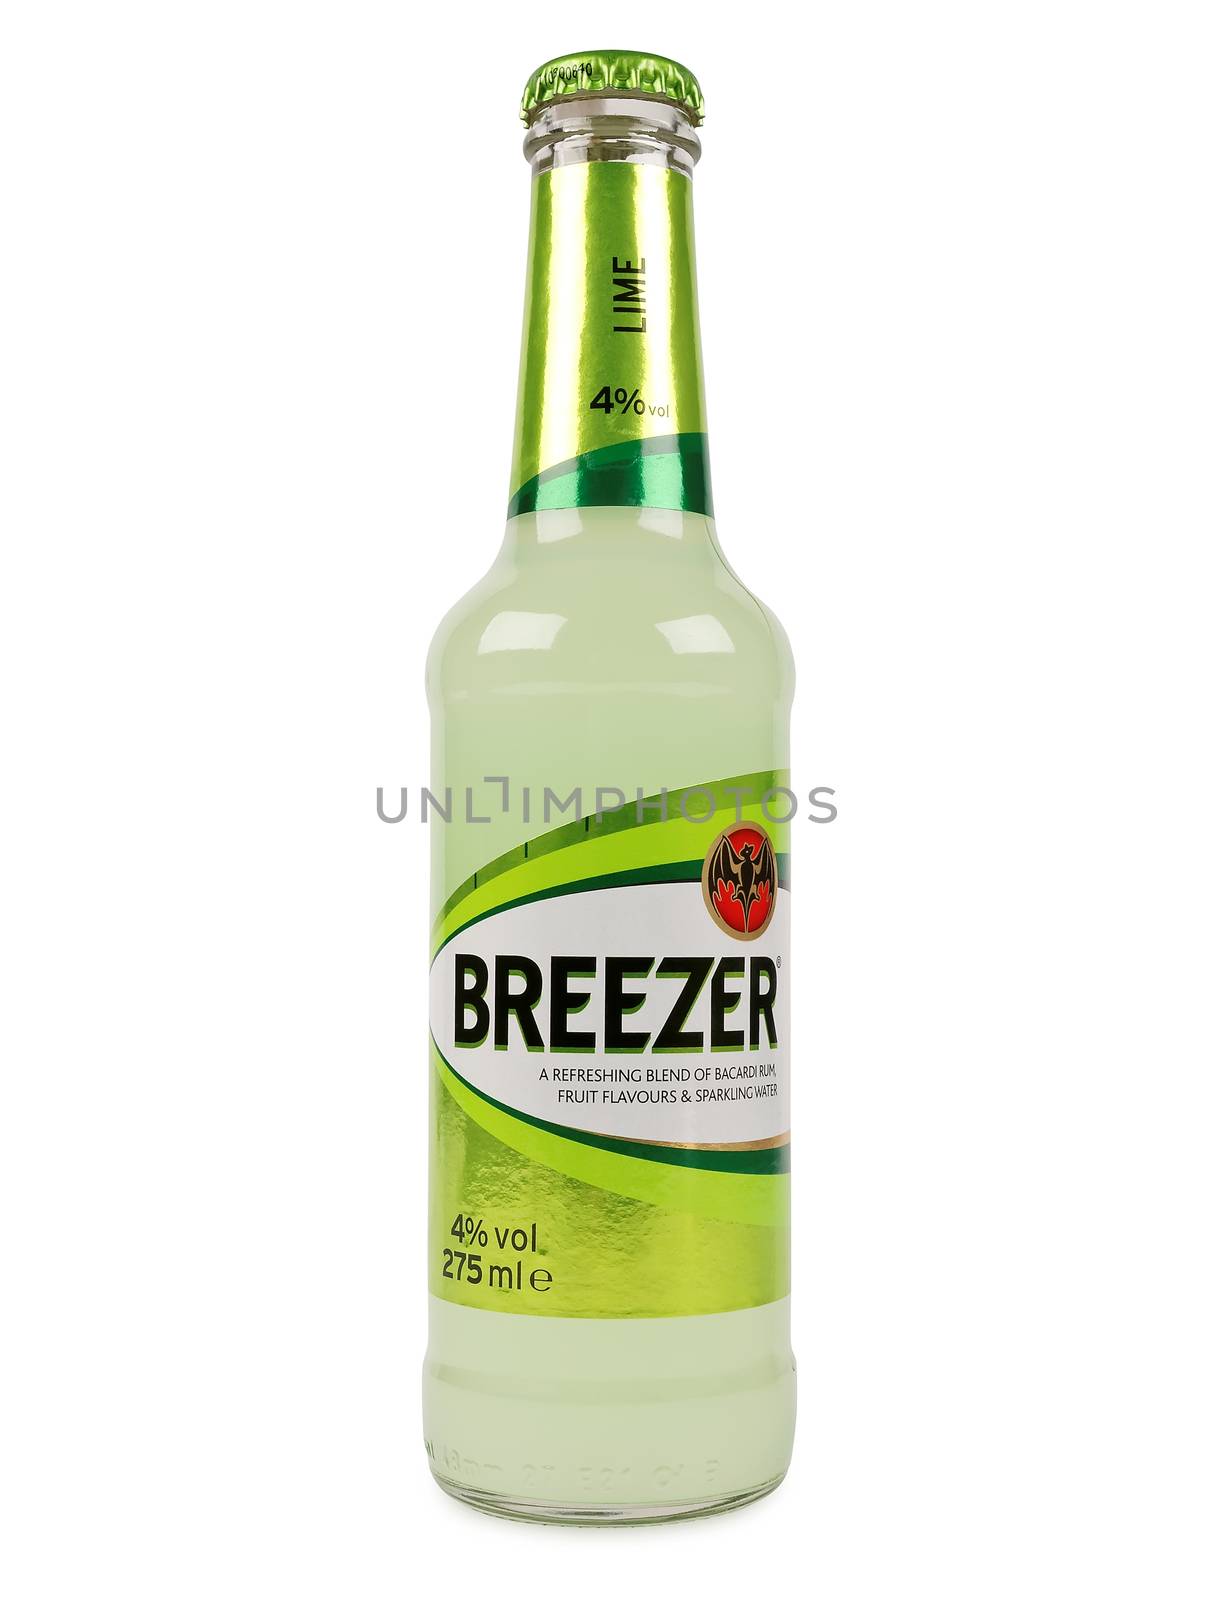 Baccardi Breezer Lime by sewer12